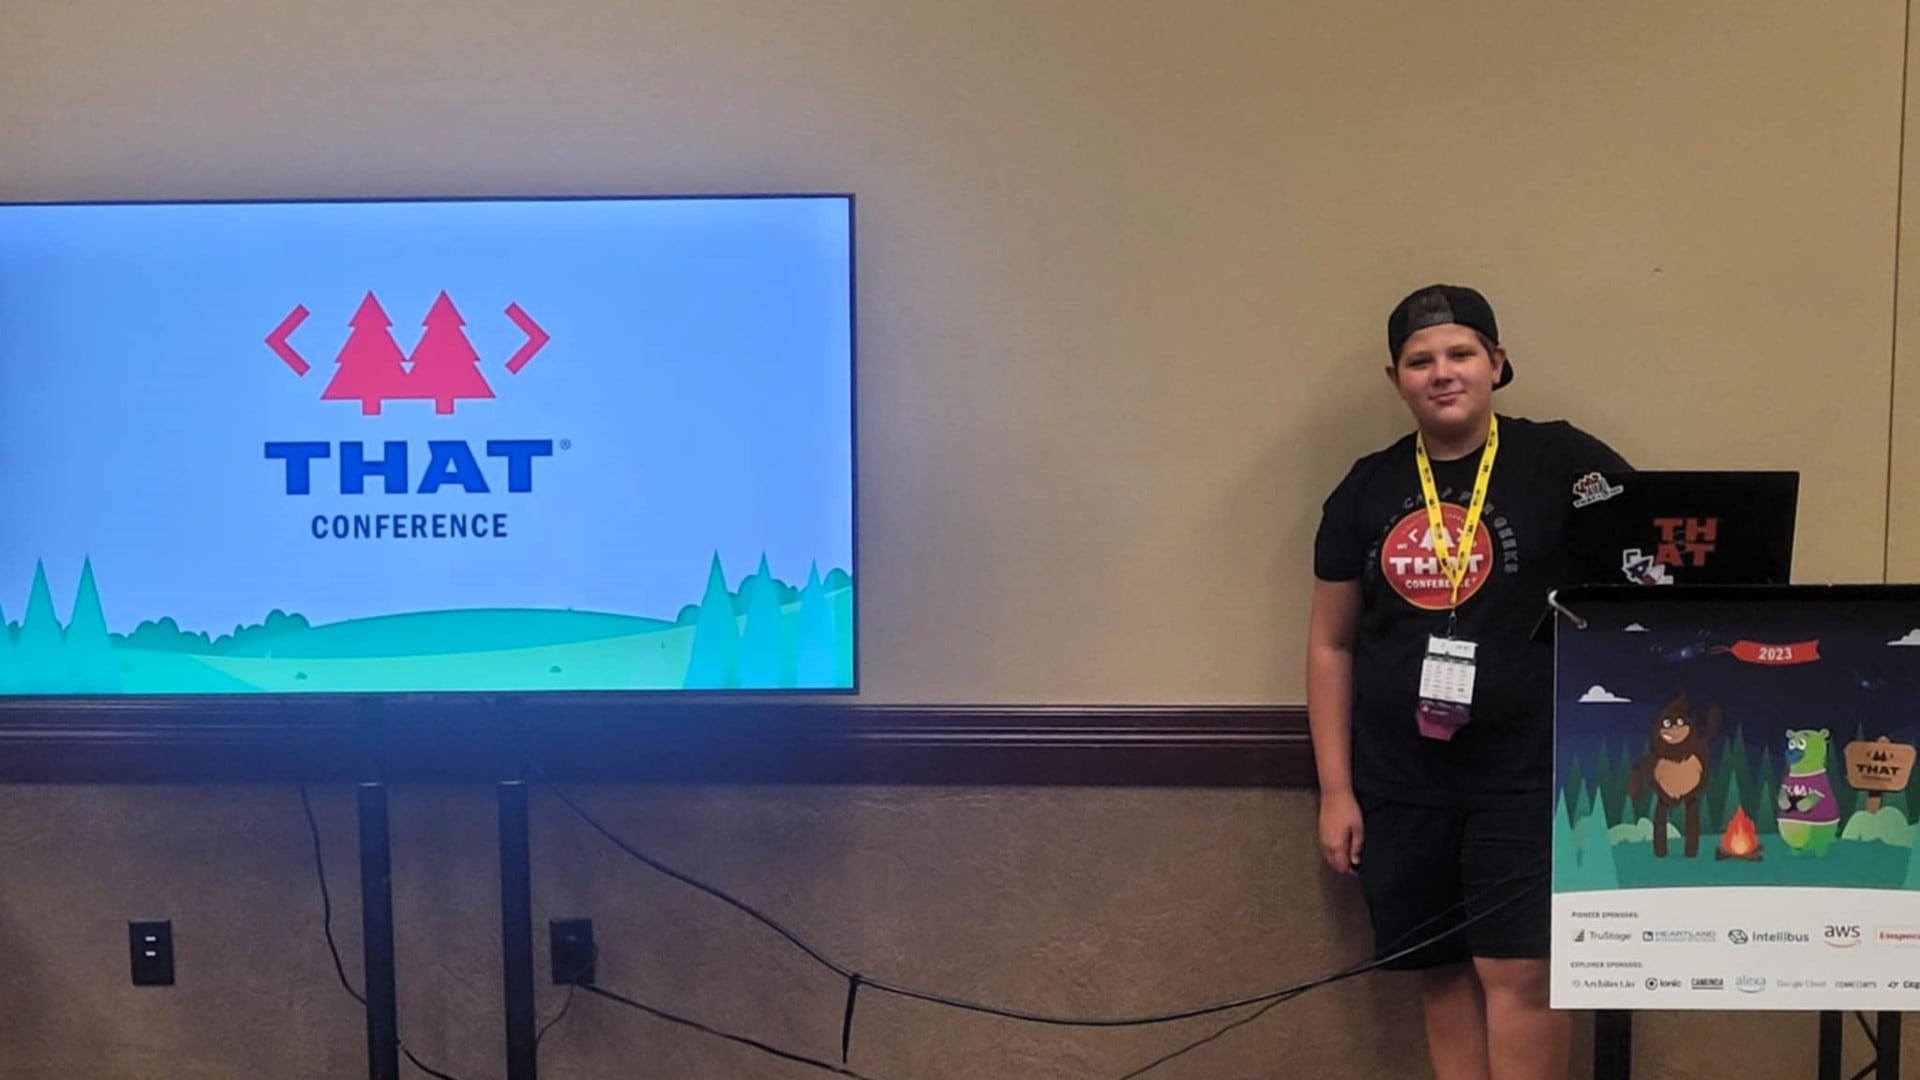 Connor Freeman, 11, of Joliet, will present at THAT Conference, which will run July 29 to Aug. 1 in Wisconsin. It's the second year in a row that Connor will present to an audience of 50 to 100 people of all ages.